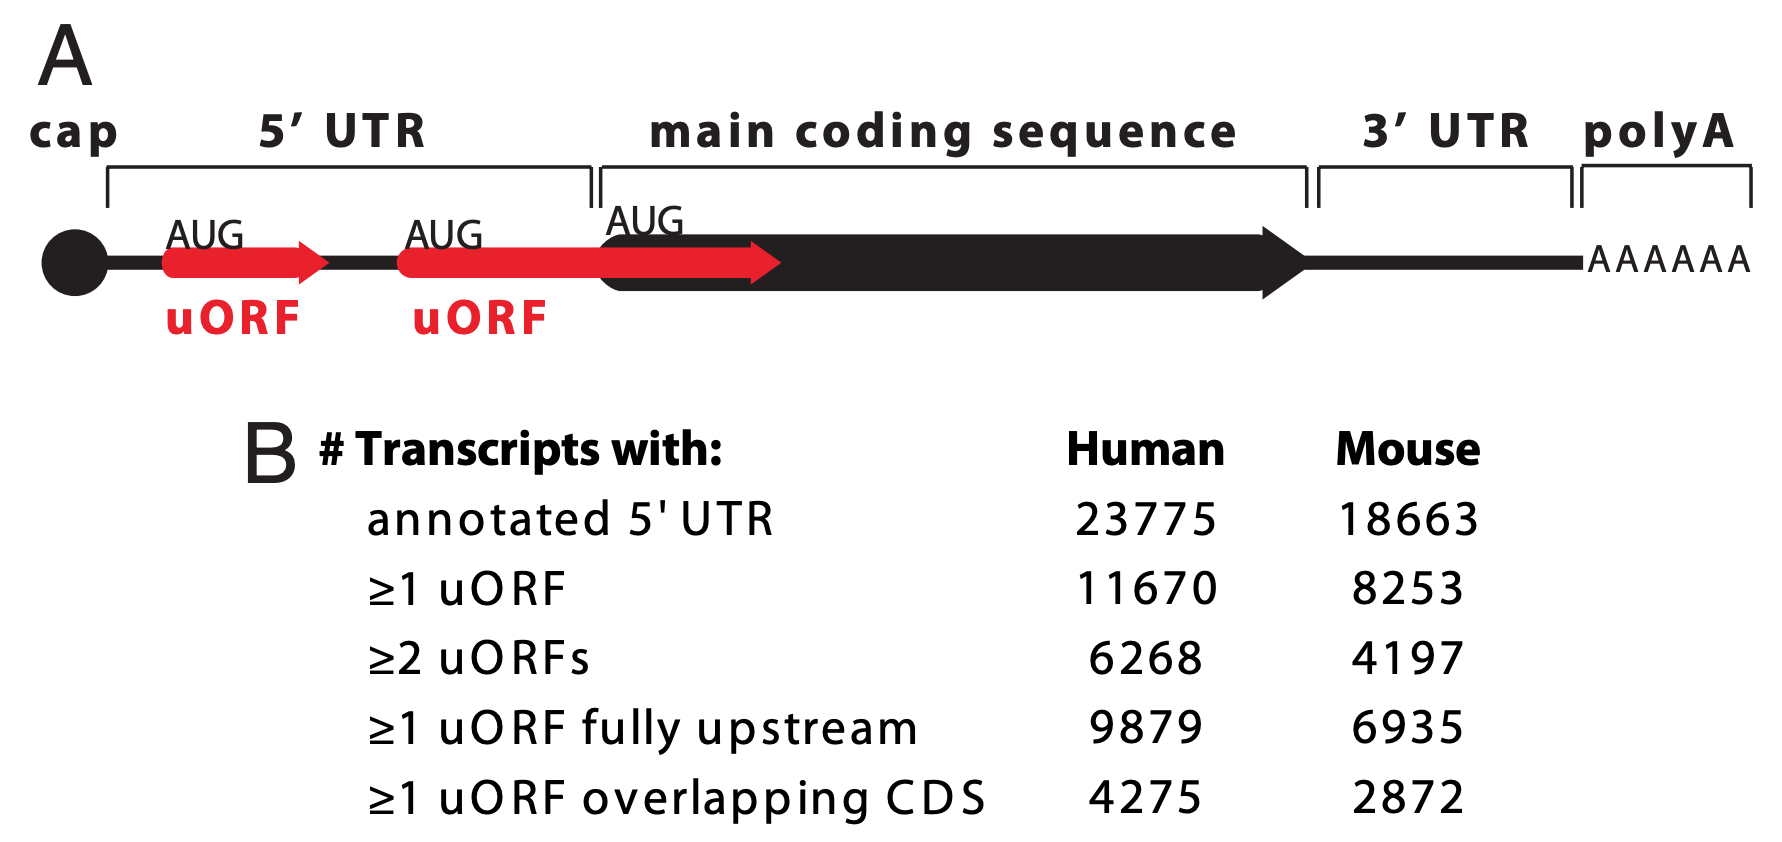 Paraphrased from Calvo et al. 2009. A) A schematic representation of an mRNA transcript with two uORFs (red arrows), one fully upstream and one overlapping the main coding sequence (black arrow). uORFs were defined by Calvo et al. as a start codon (AUG) in the 5' UTR followed by an in-frame stop codon (arrowhead) that precedes the **end** of the main coding sequence. Calvo et al. 2009 further refines the definition to only include uORFs that code for a minimum peptide length of 3 amino acids (or a coding sequence minimum length of 9 nt). (B) Number of uORFs in human and mouse RefSeq transcripts.